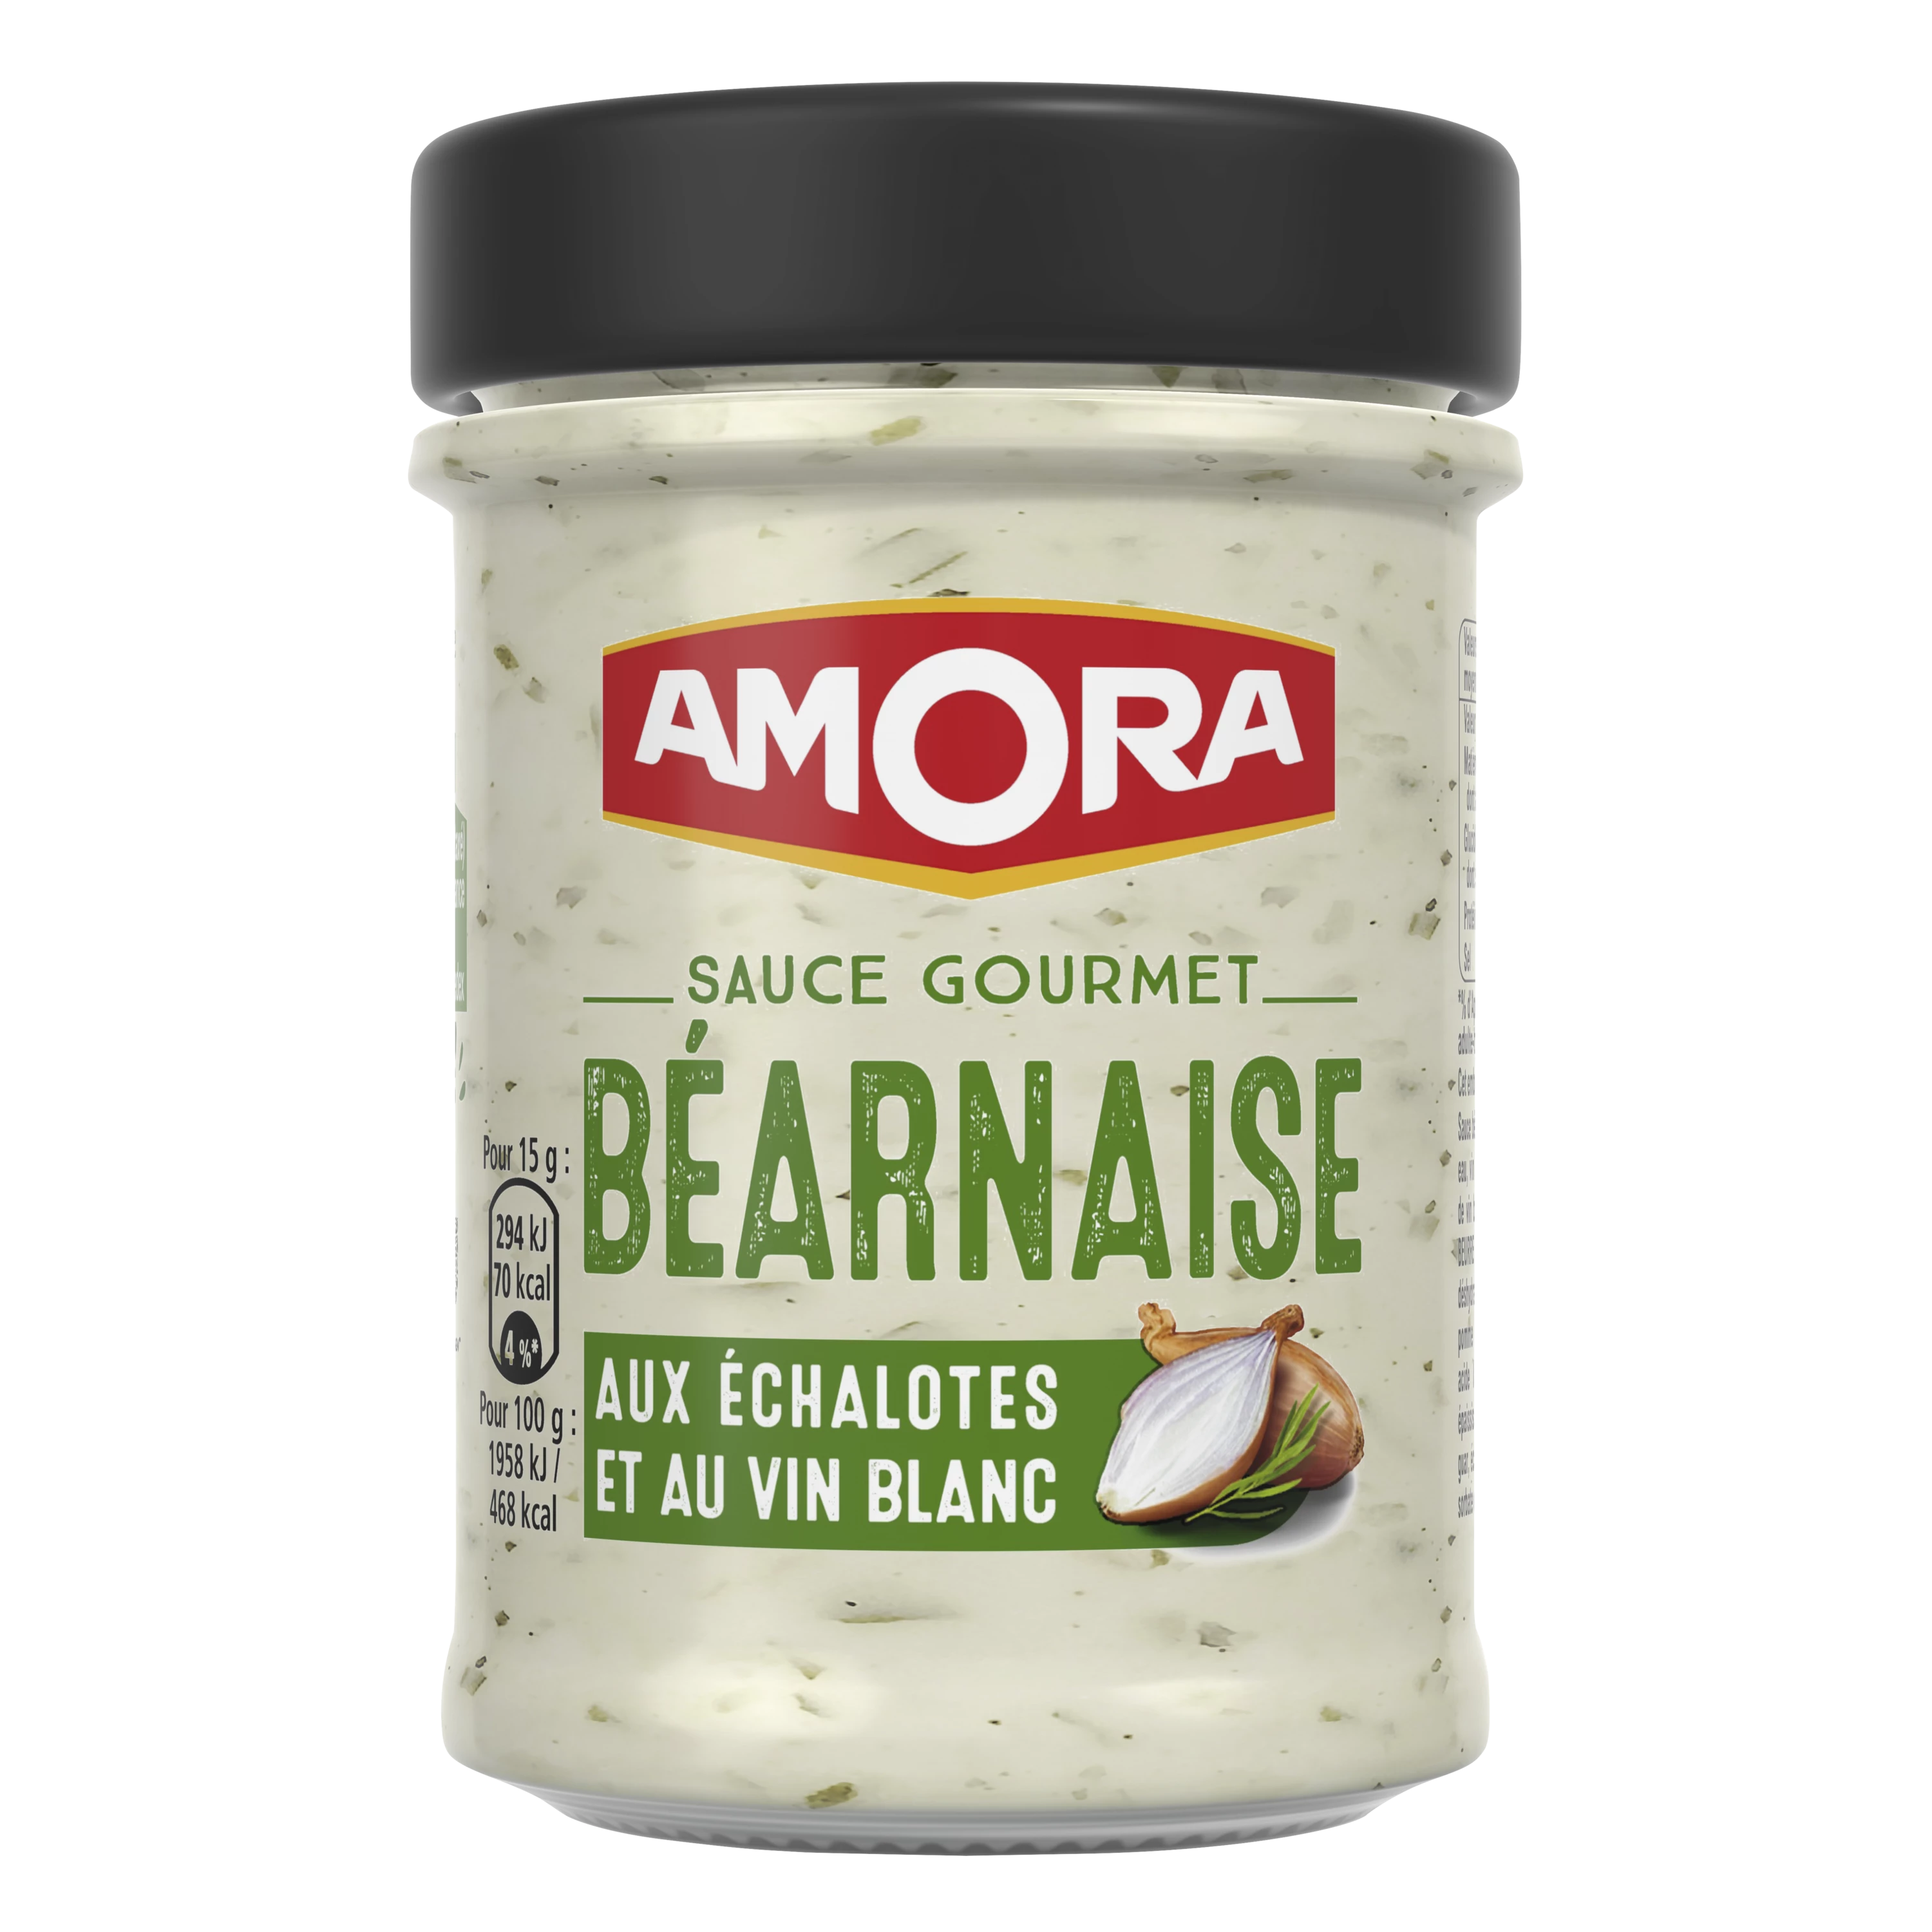 Gourmet Béarnaise Sauce with White Wine Shallots, 184 g - AMORA